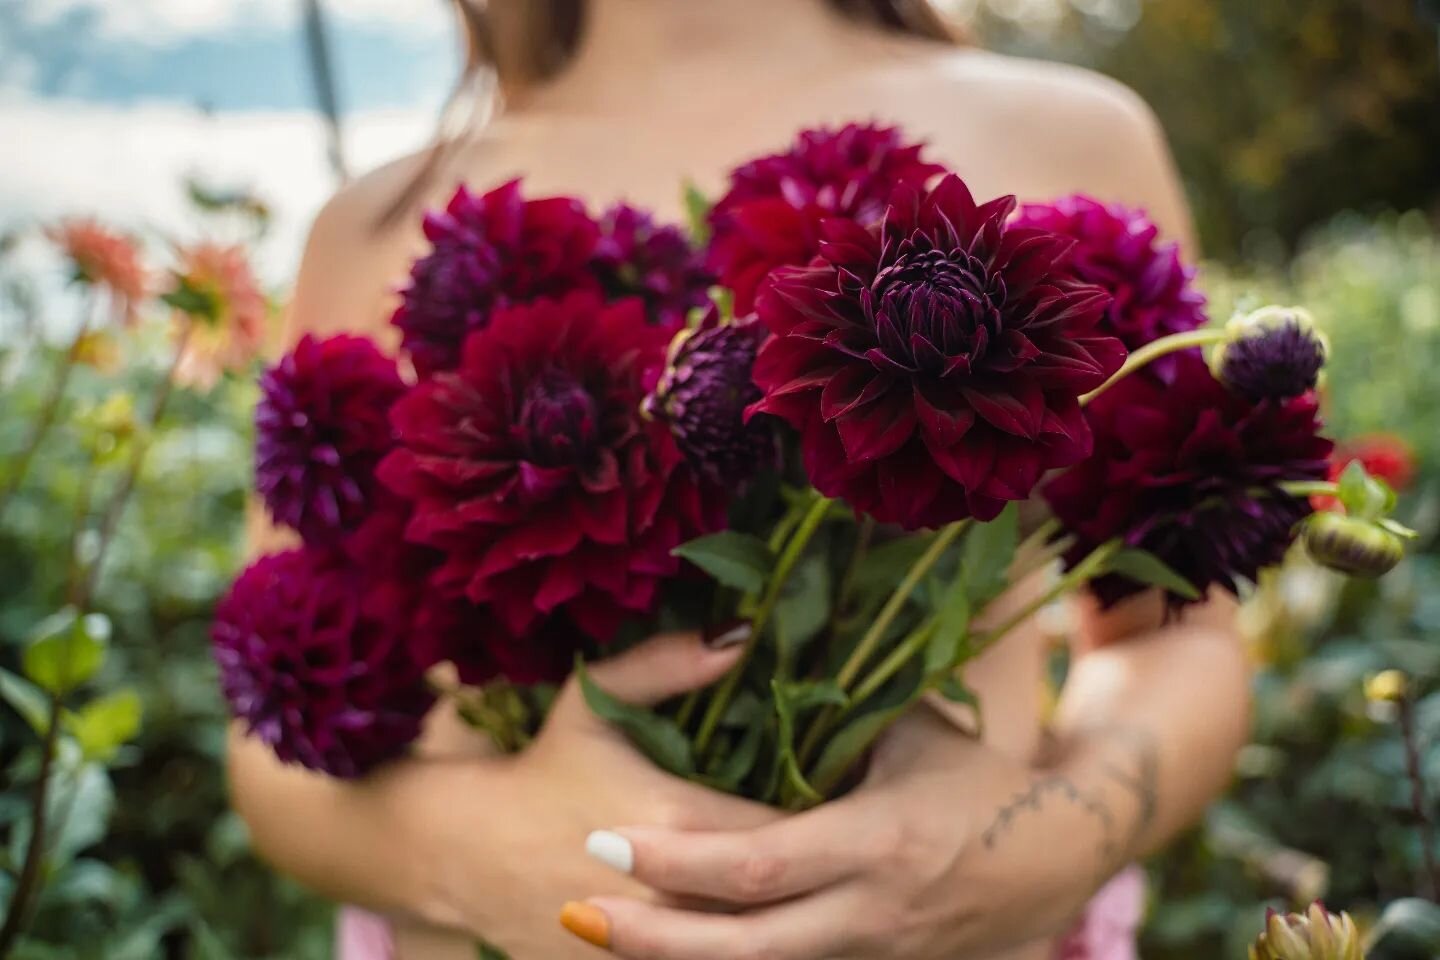 Me and my beautiful wife and I had the opportunity to work with @lavenderandlocksfarm to take some awesome photos and videos in their Dahlia fields!